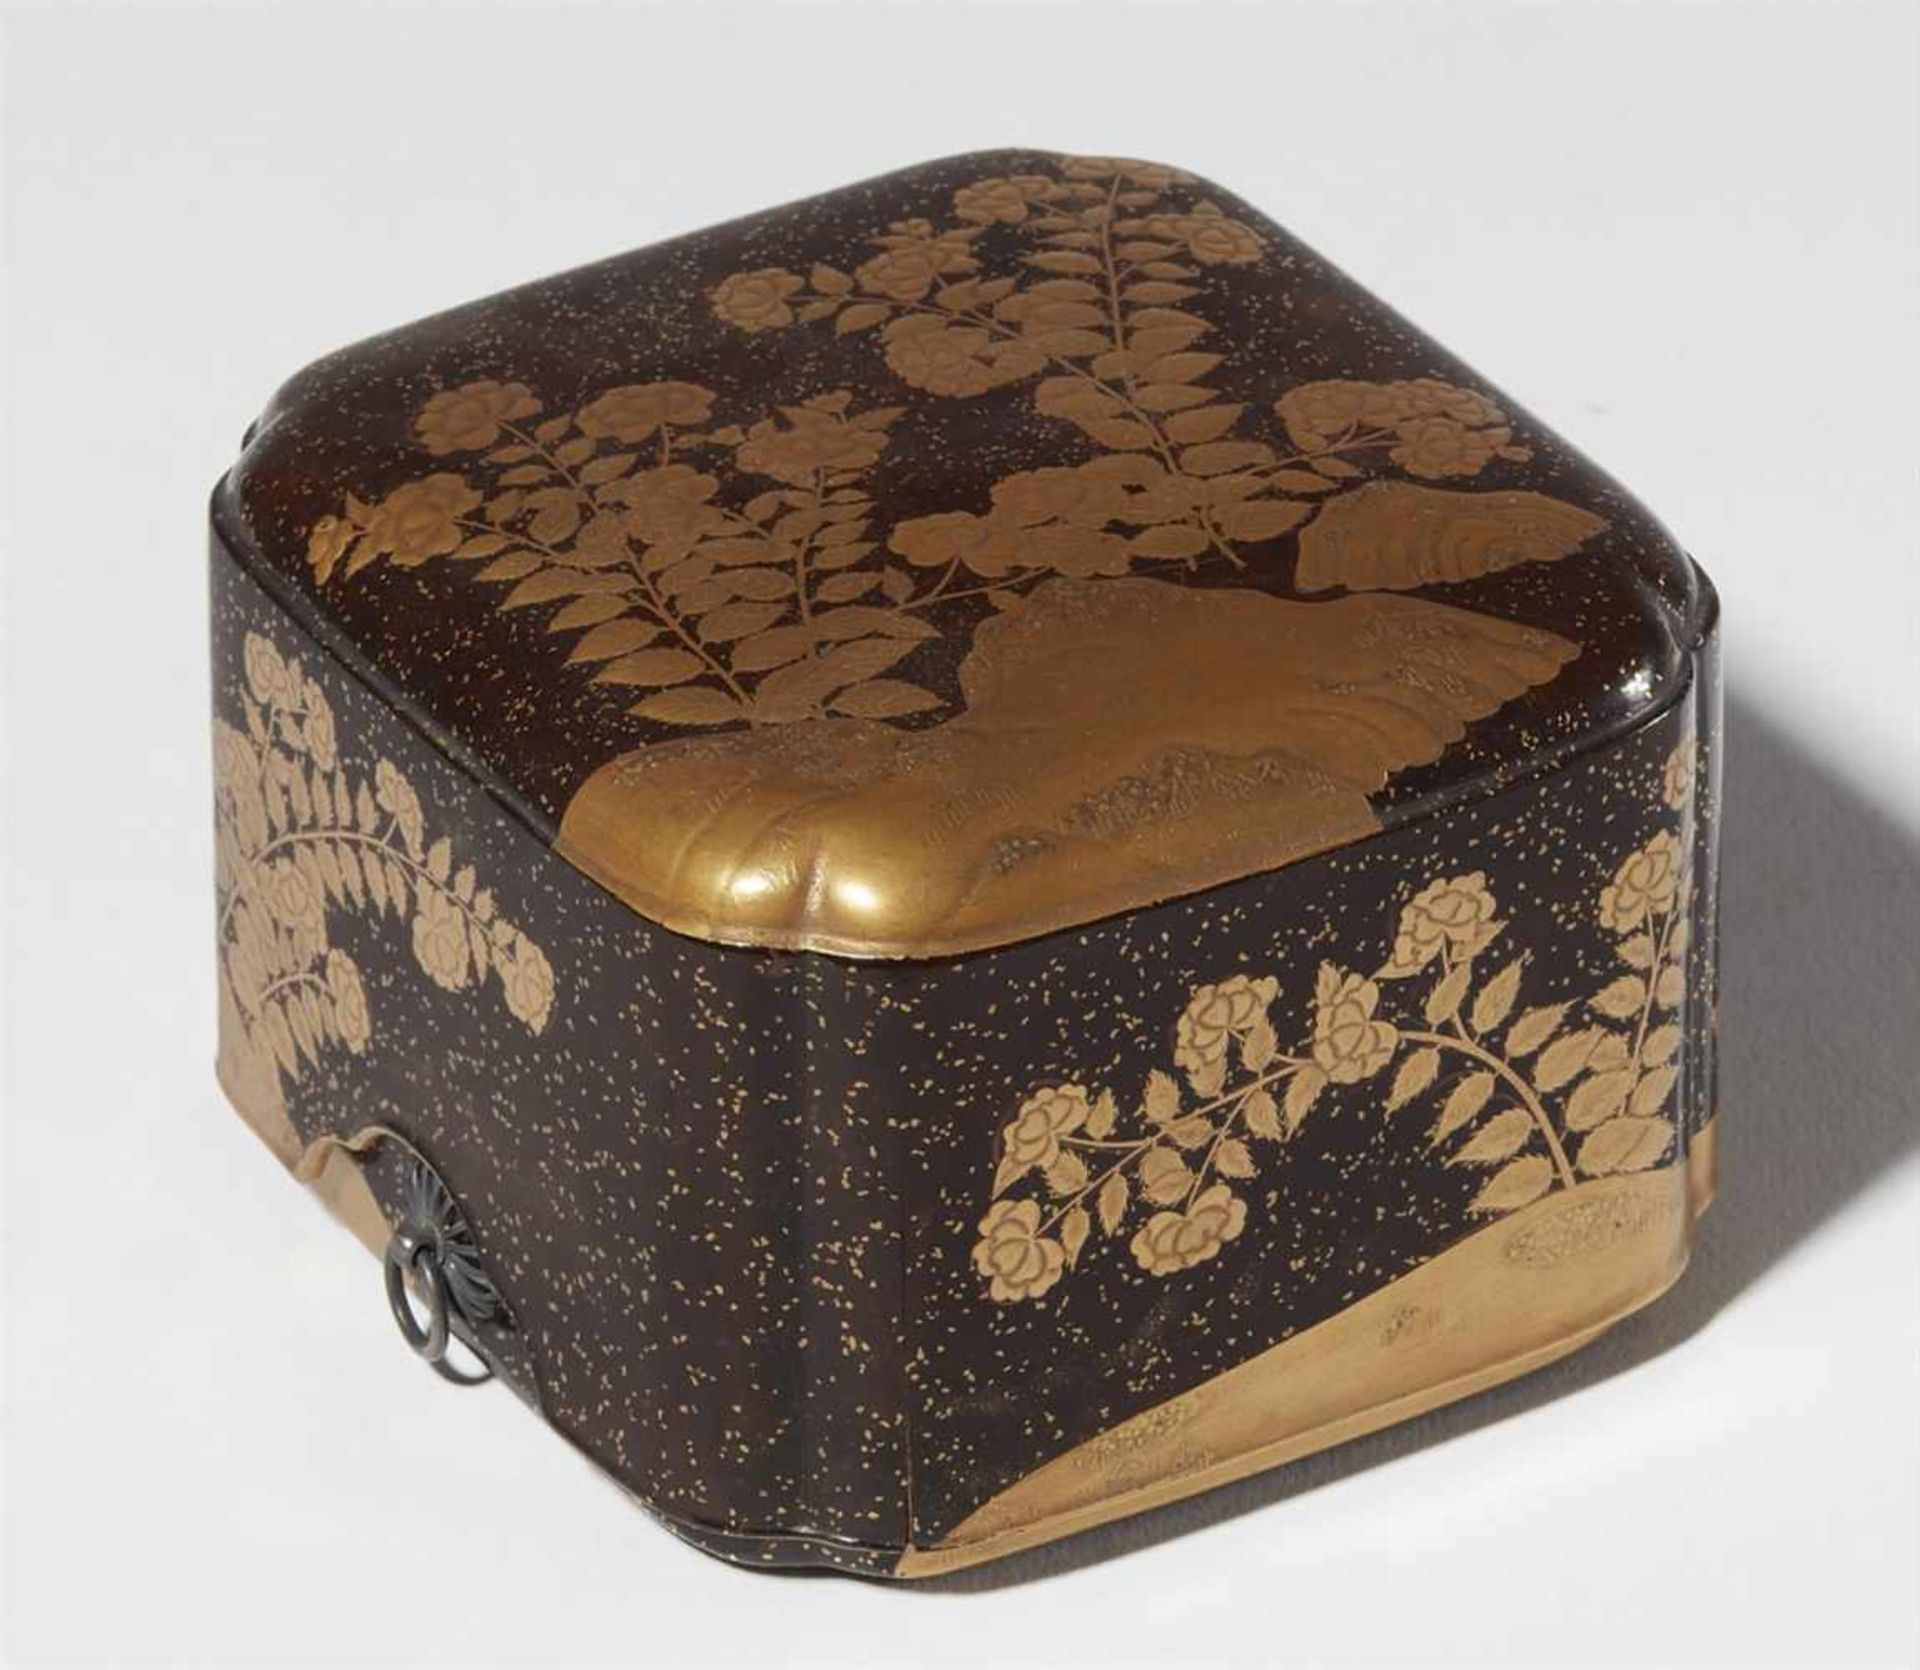 A small lidded lacquer box. 19th century